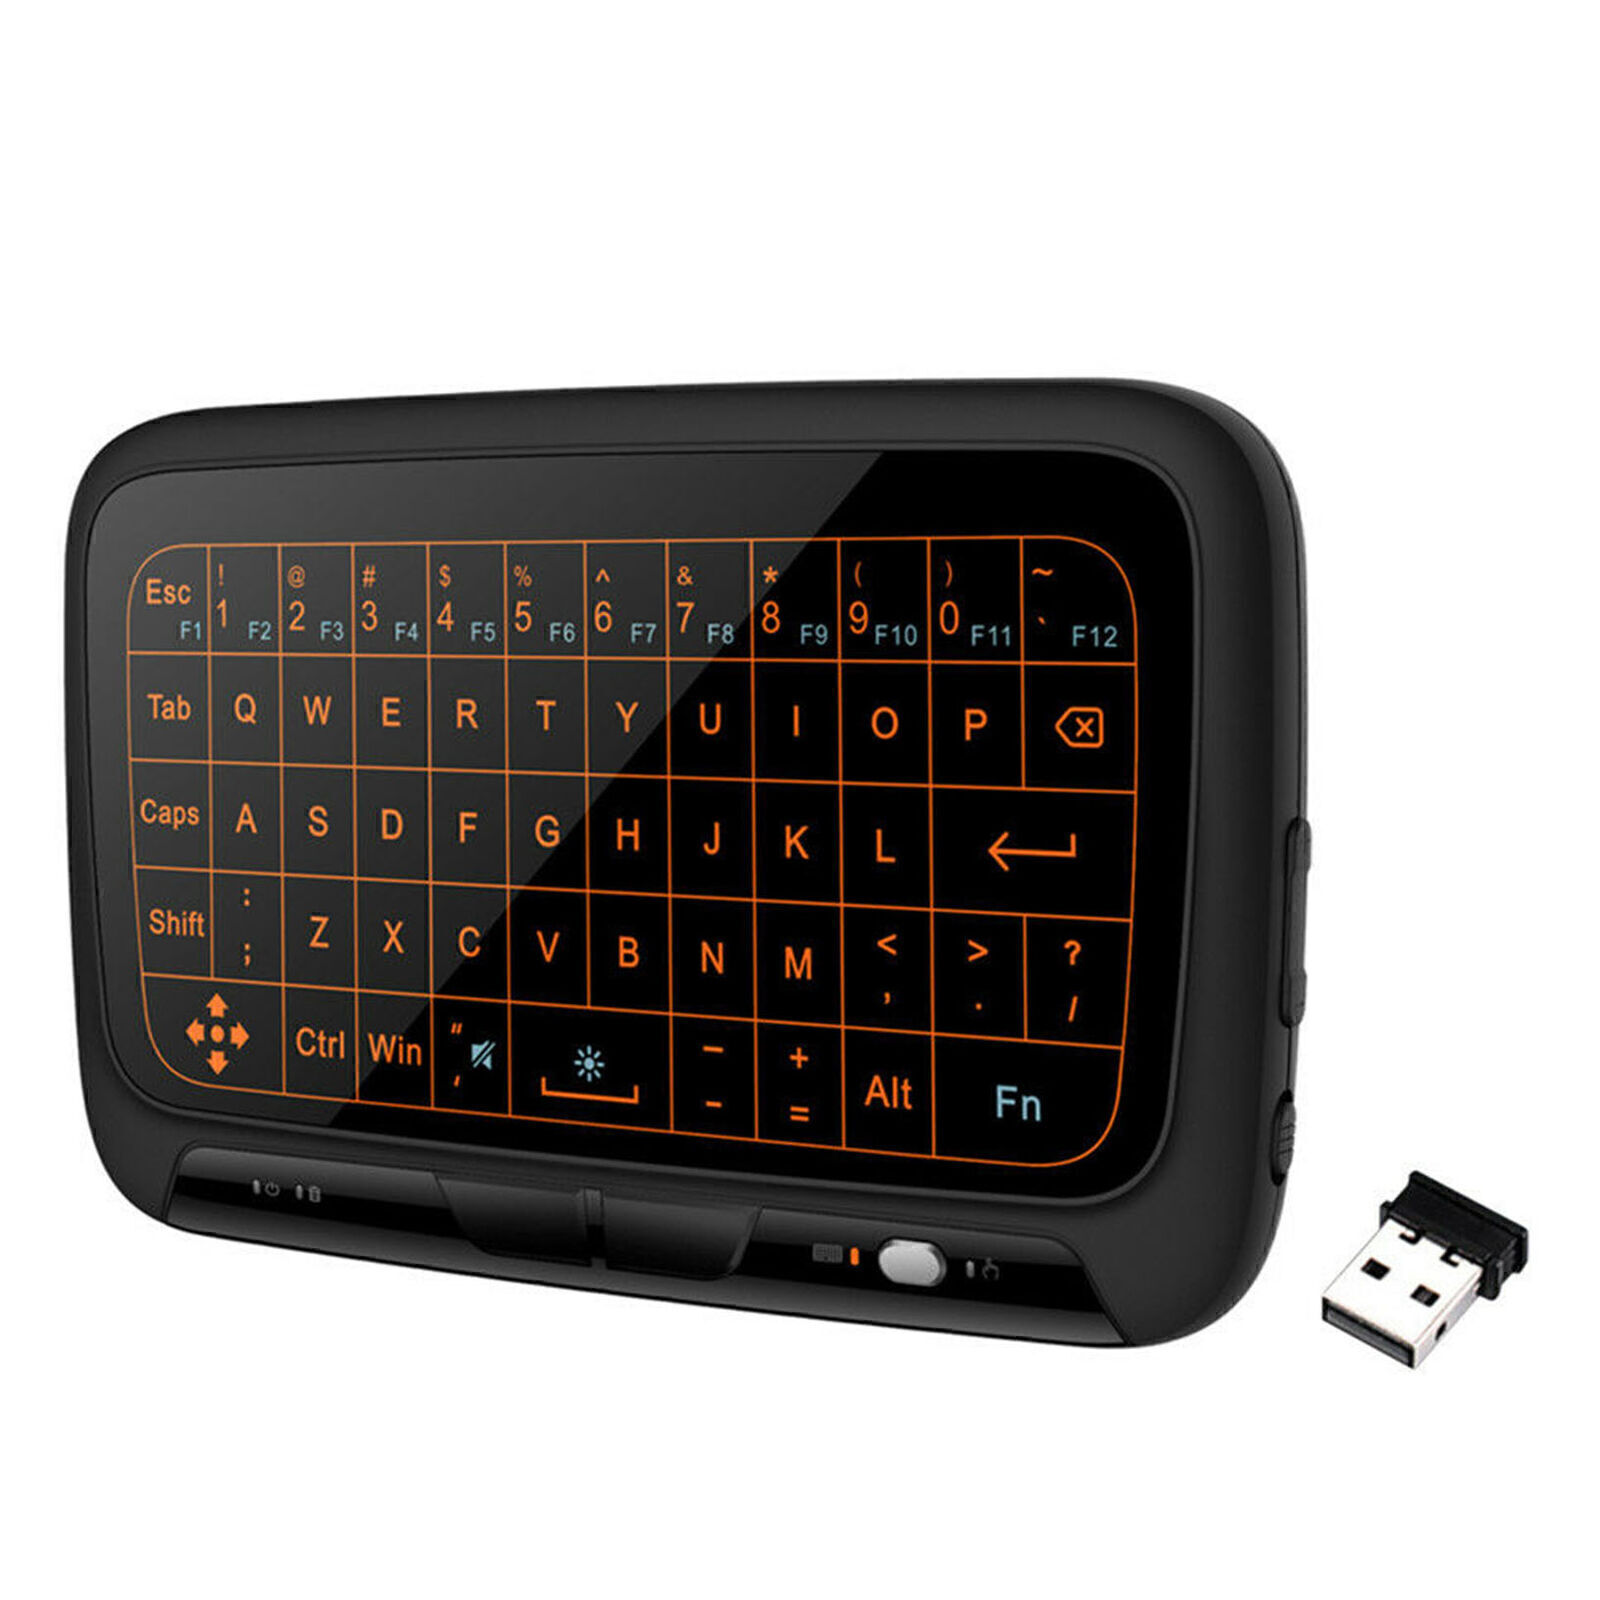 Touchpad 2.4G Backlight Keyboard Air Mouse Remote for Android Smart TV Box